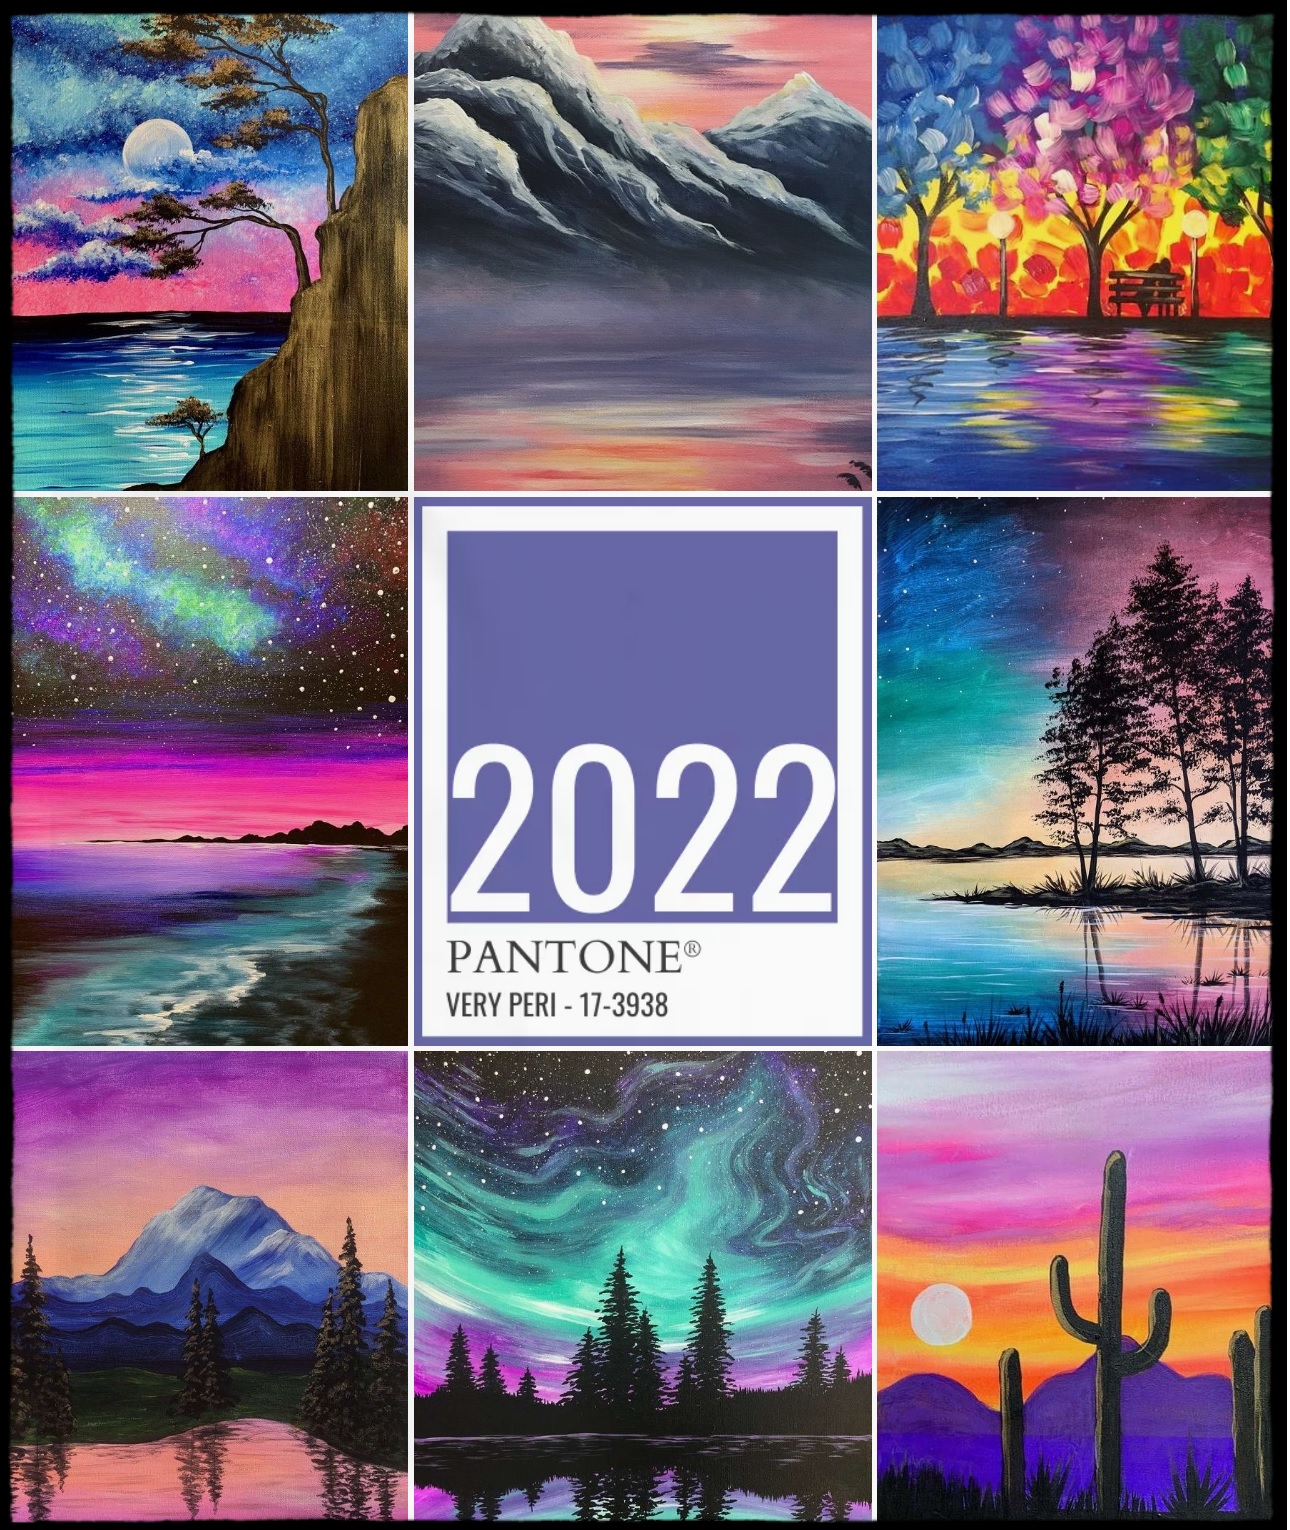 2022 Pantone Color of the Year!